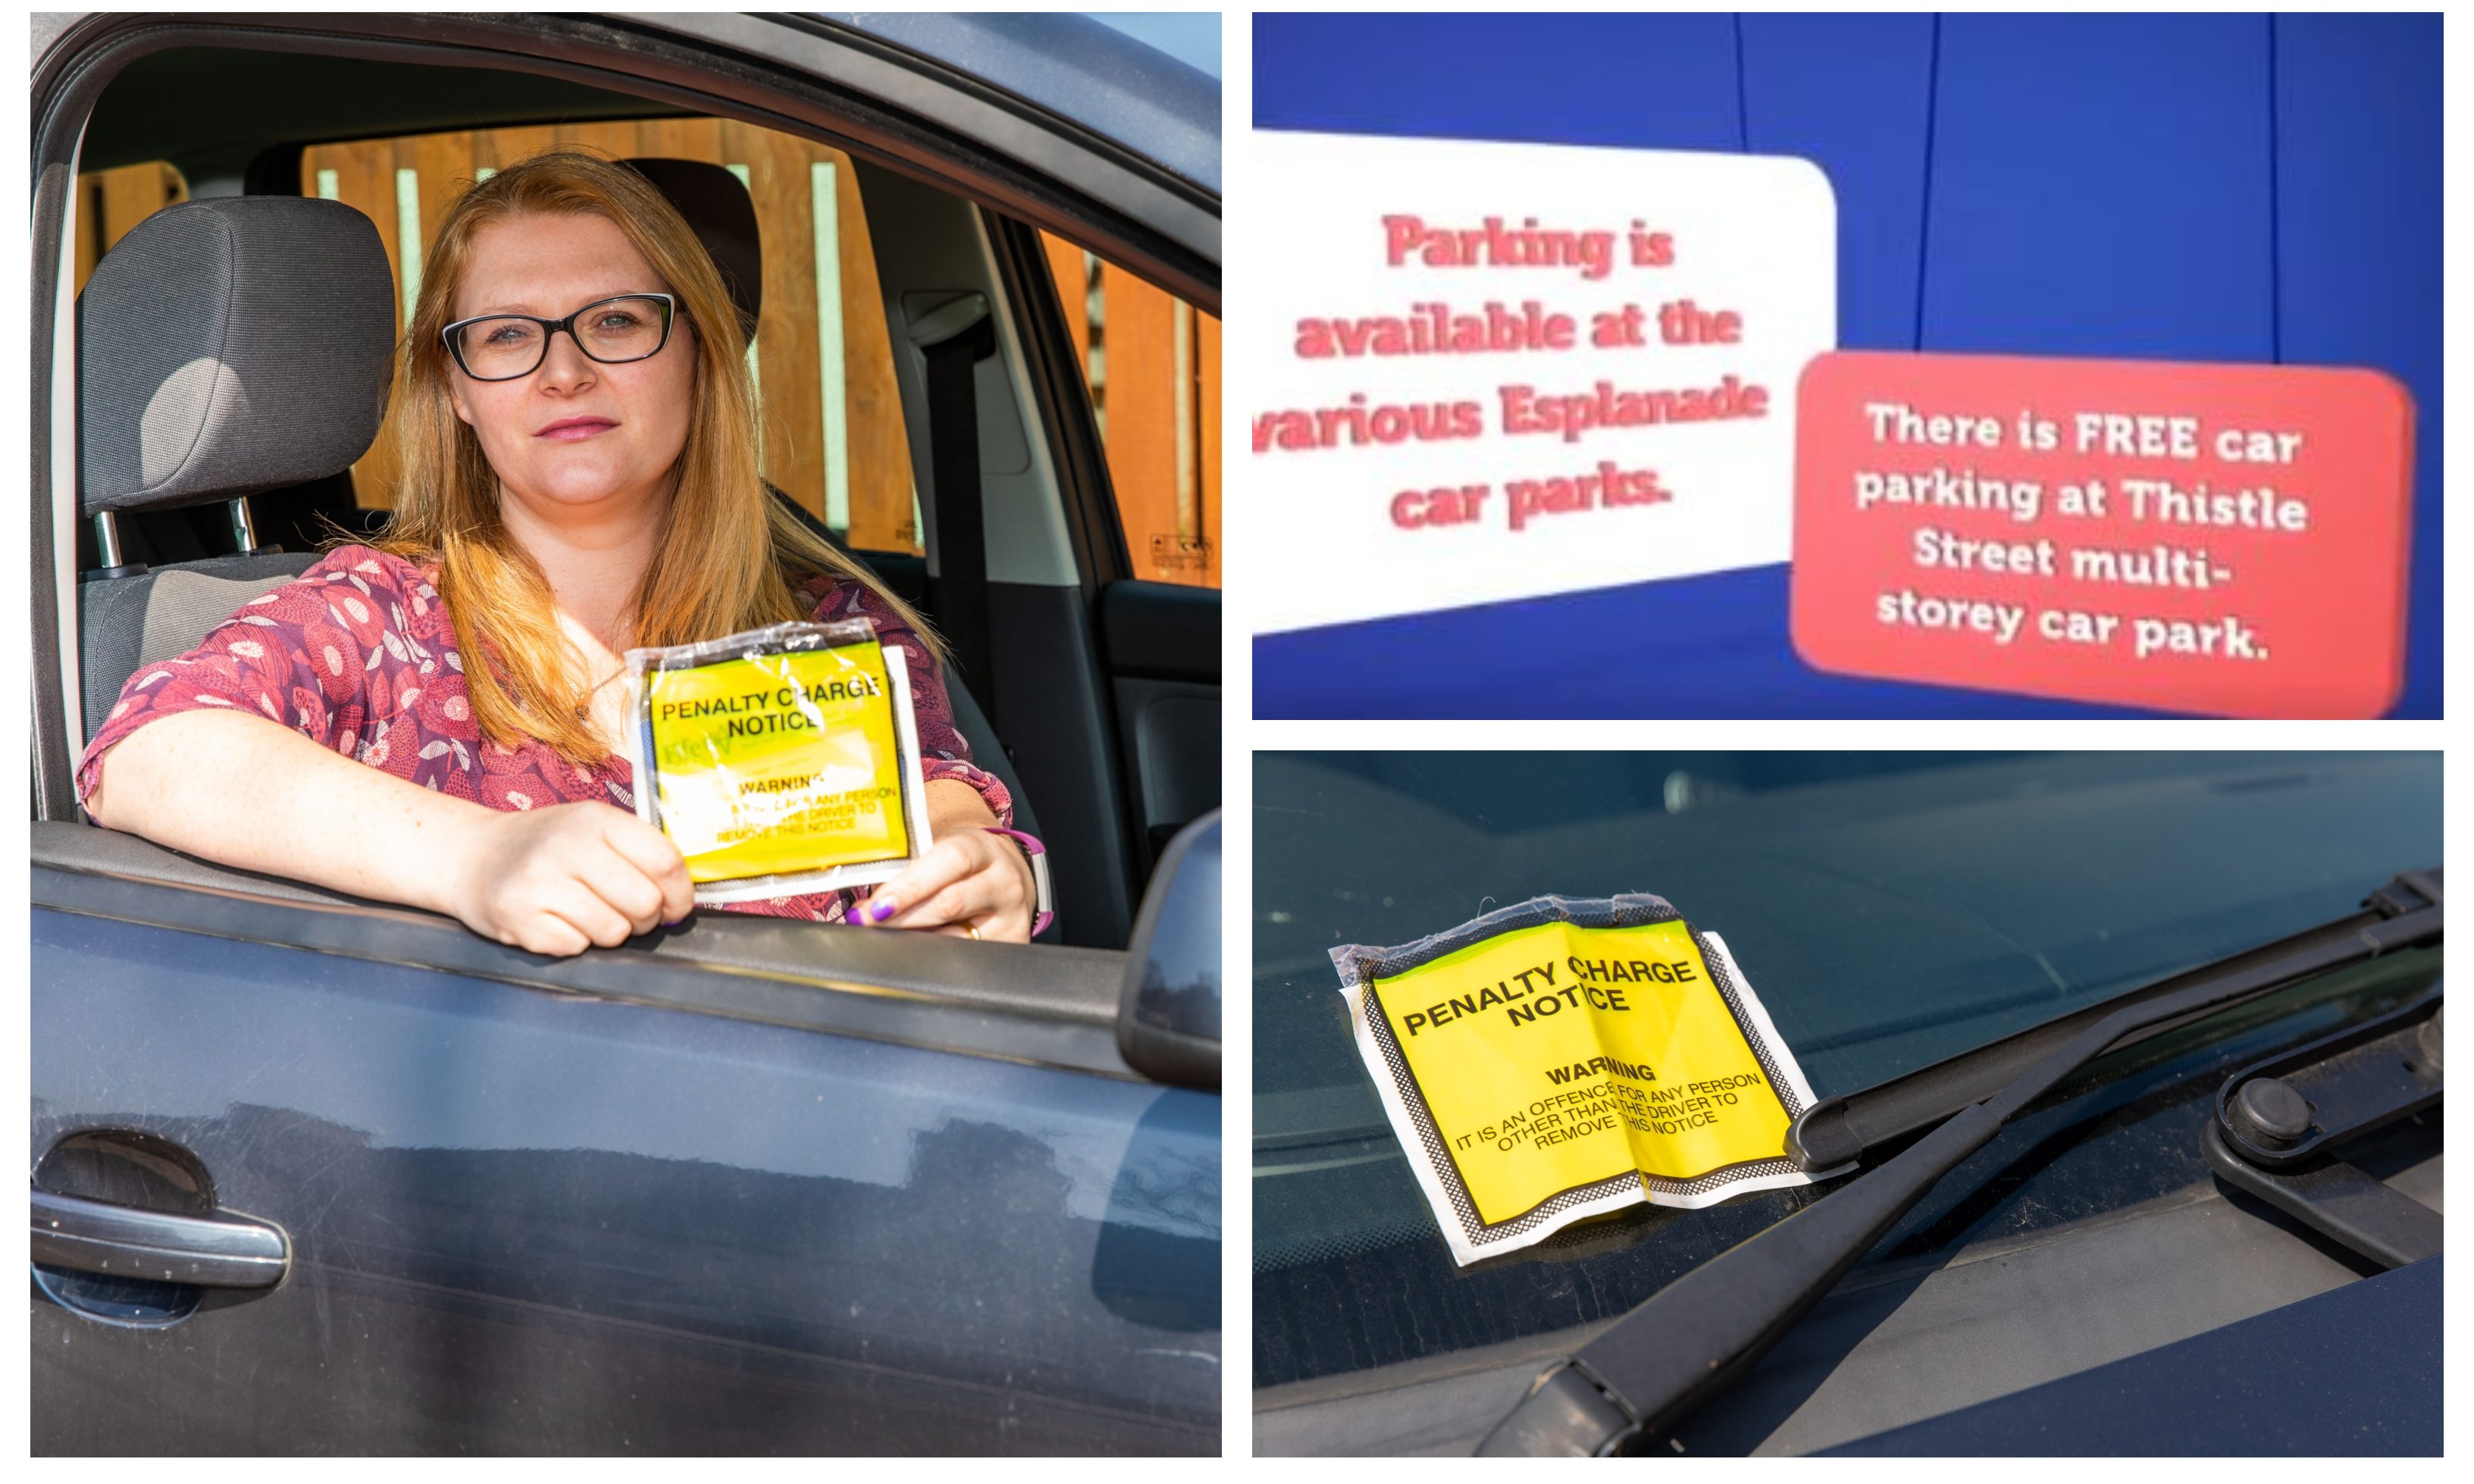 Katy Stevenson with the ticket she received in a car park she was advised was free. Top right shows a screengrab from the original video.